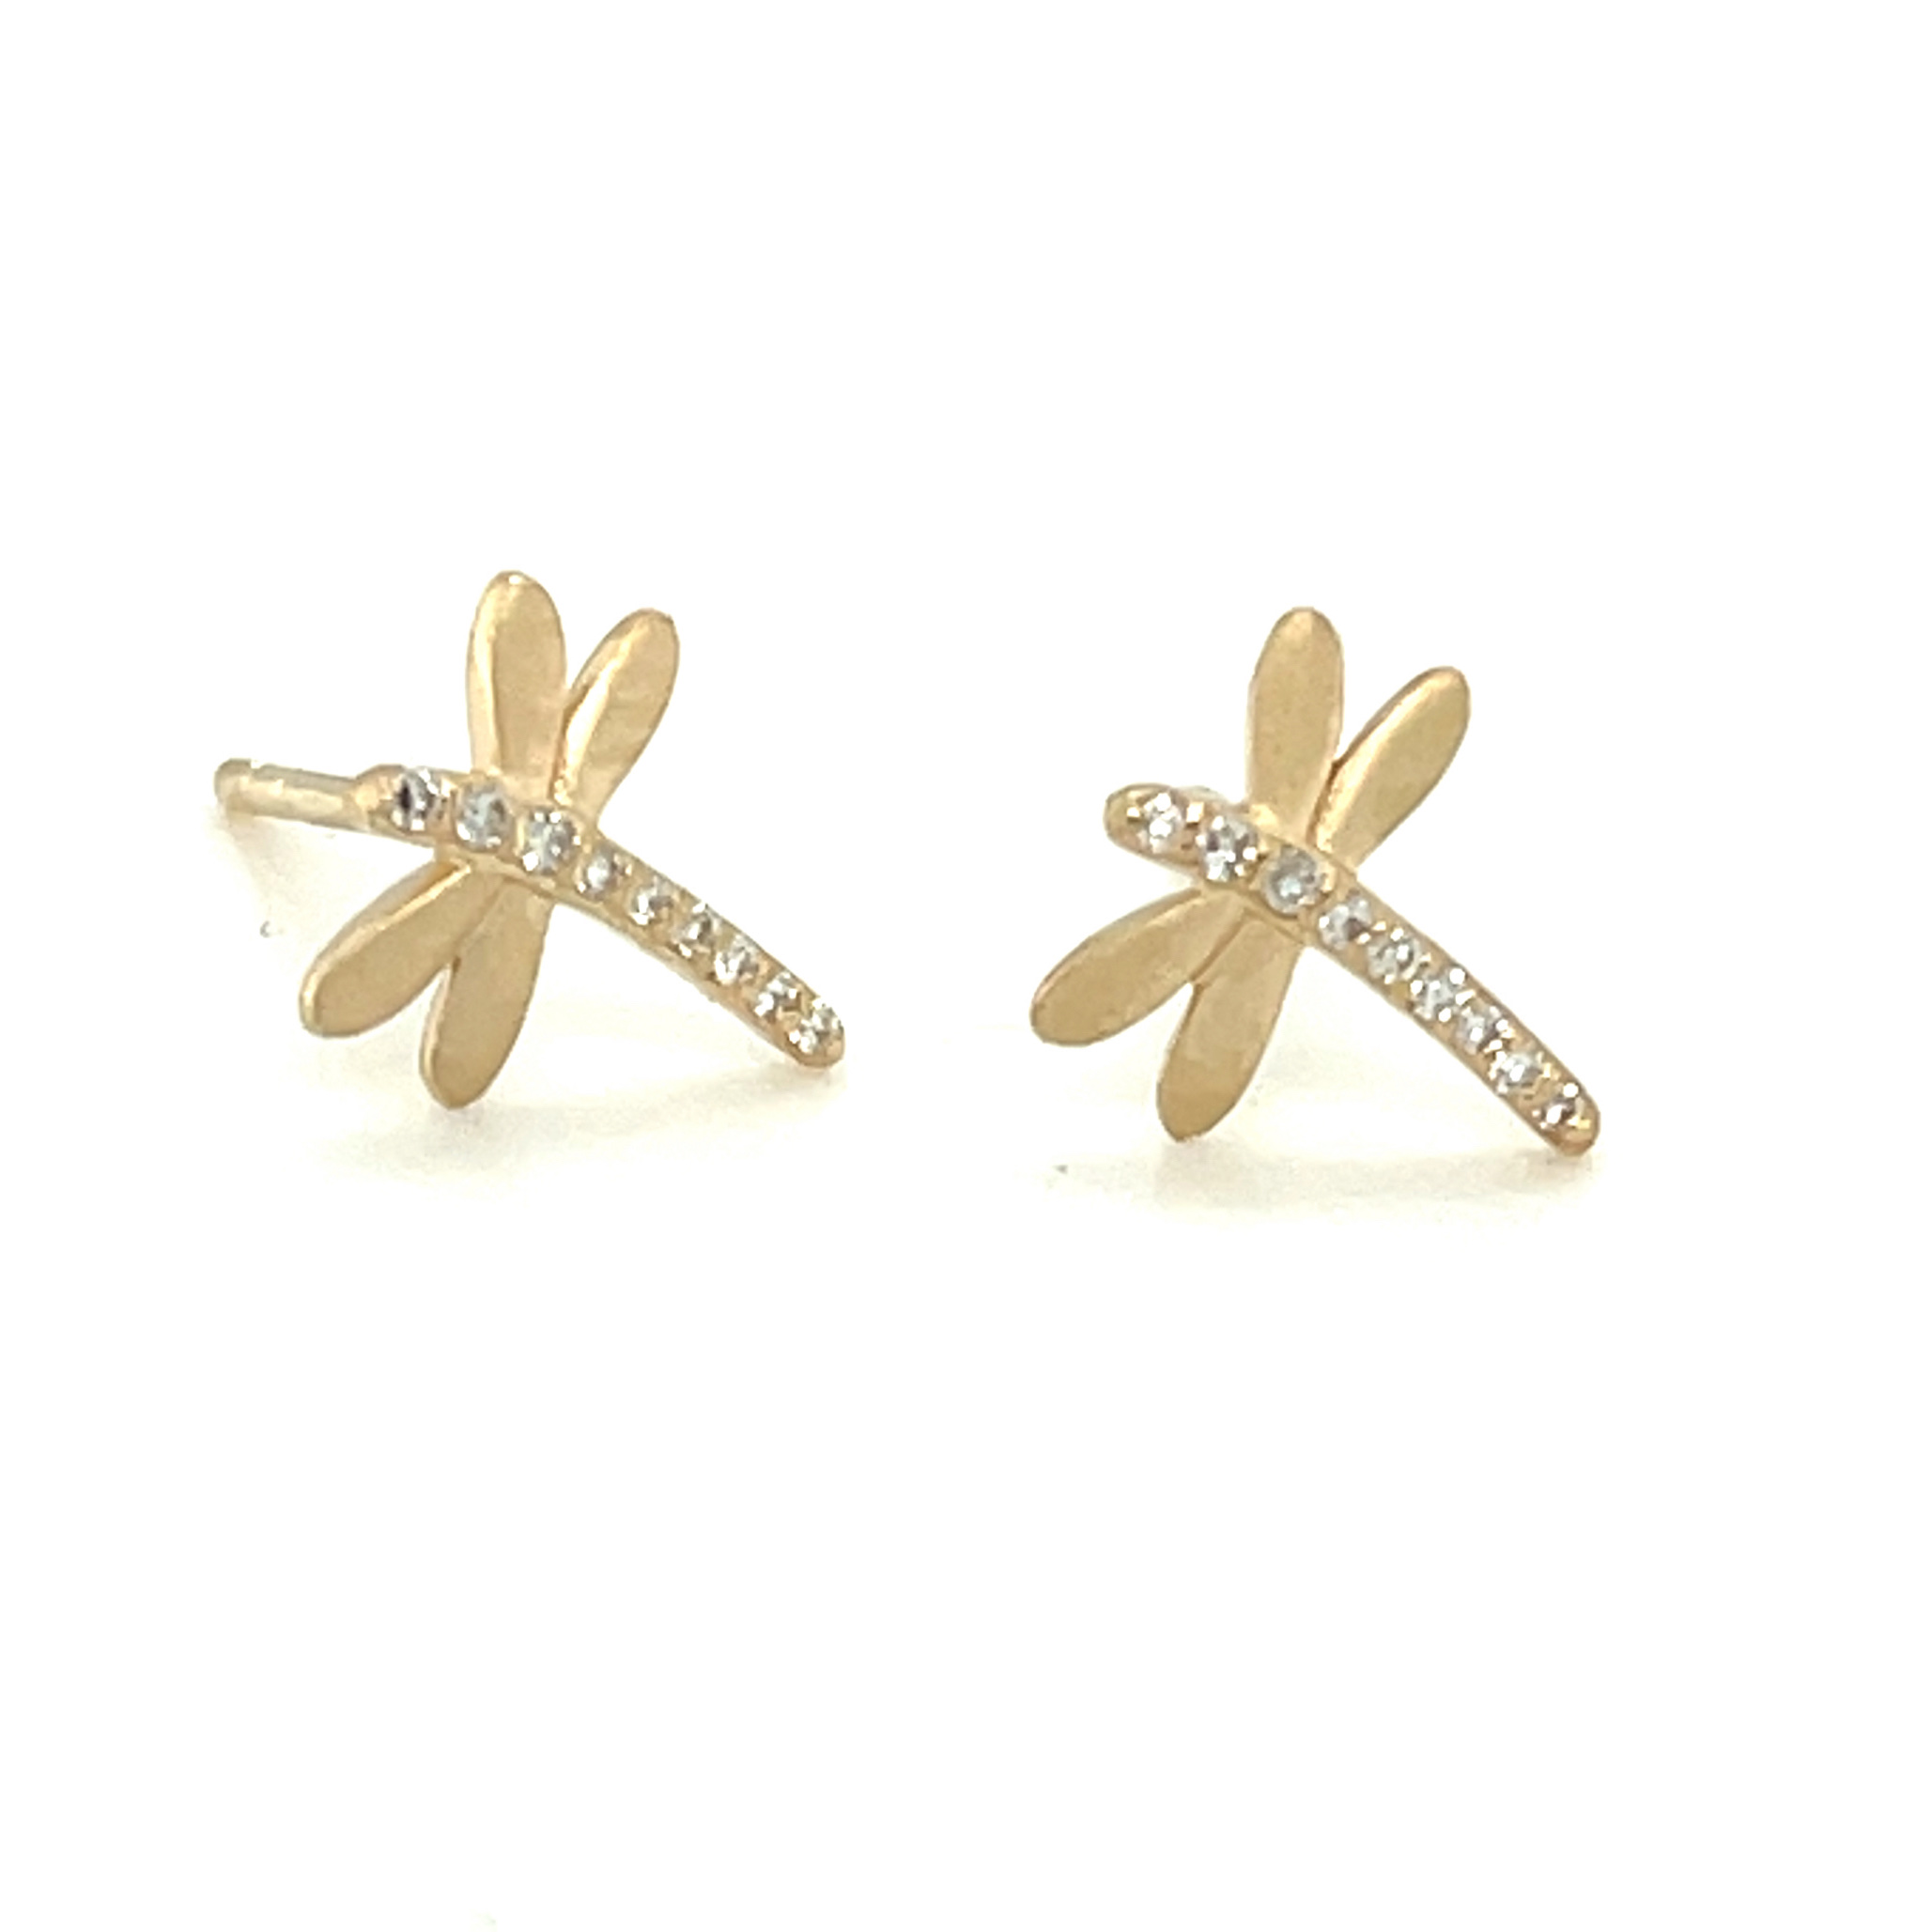 Featured image for “Baby Dragonfly Stud Earrings”